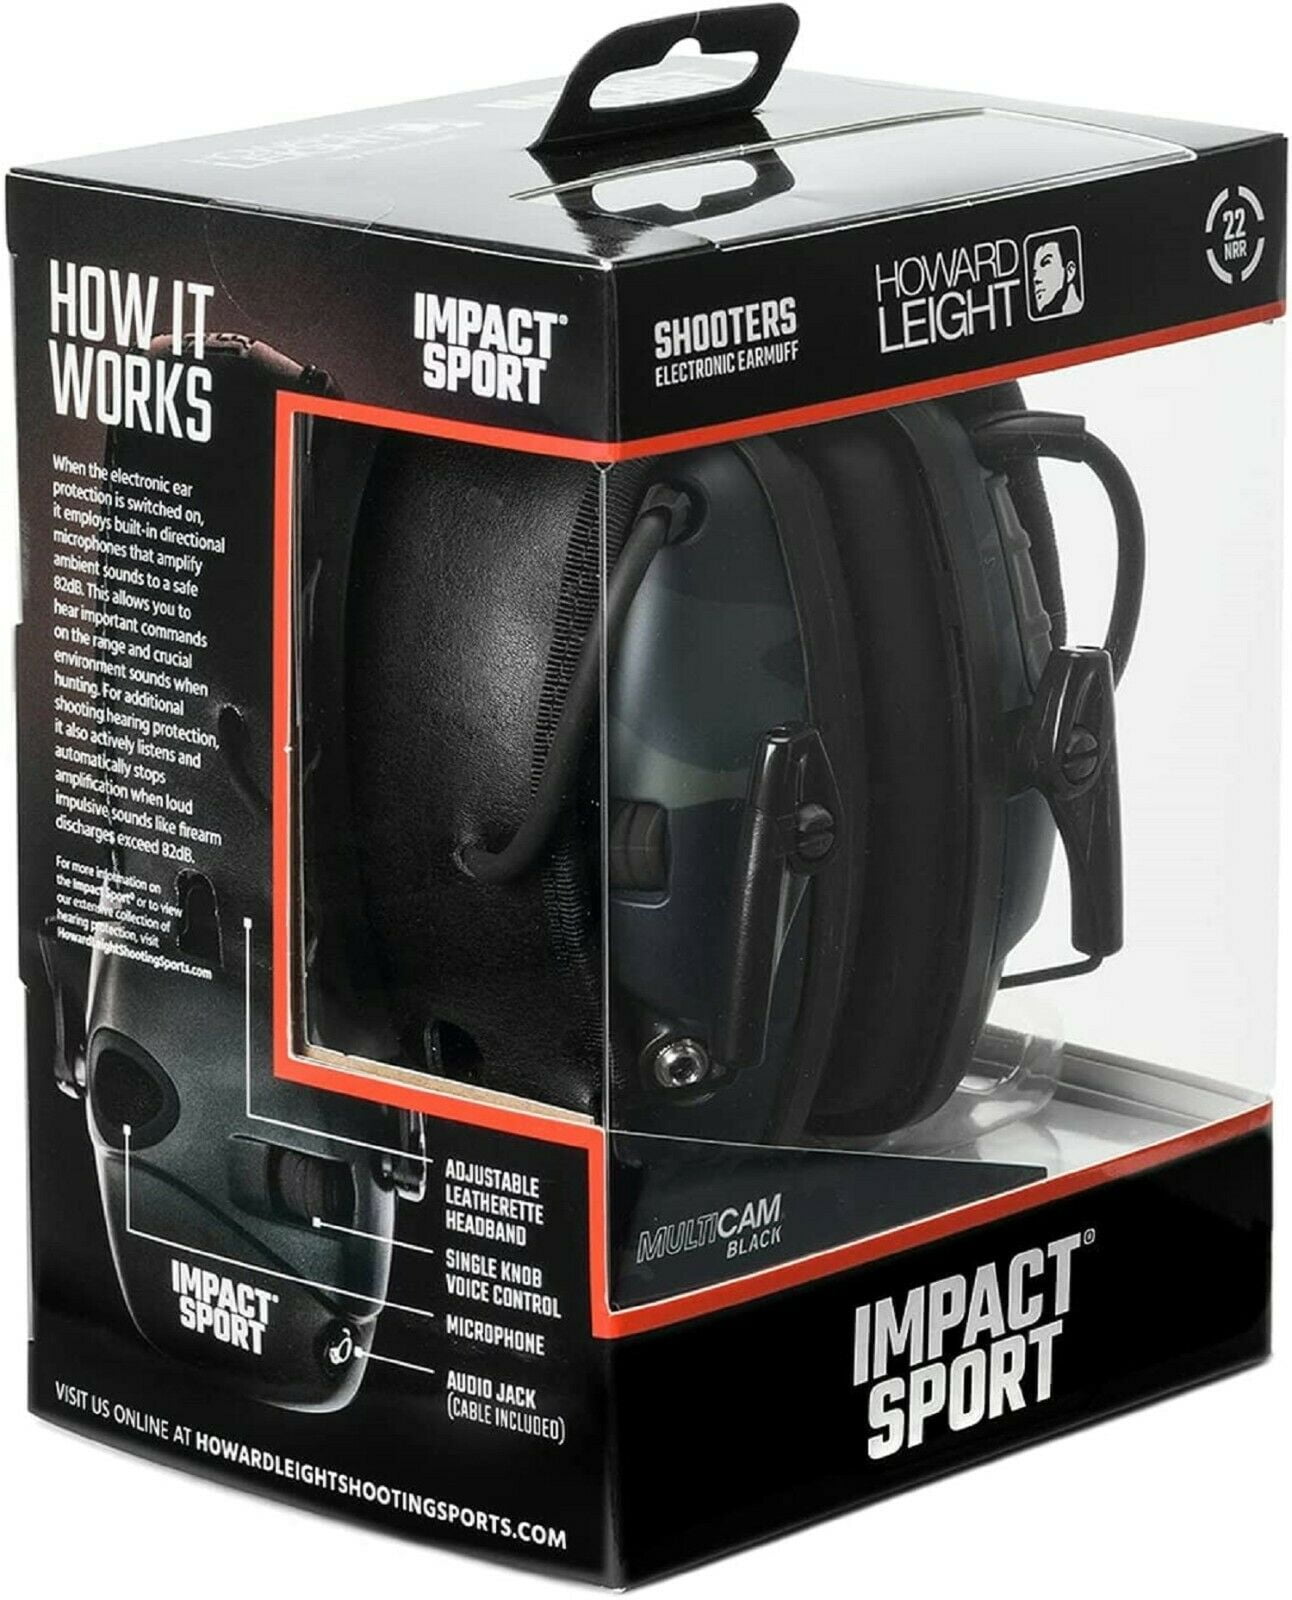 Classic OD Green Howard Leight Impact Sport Electronic Ear Muff NRR 22 